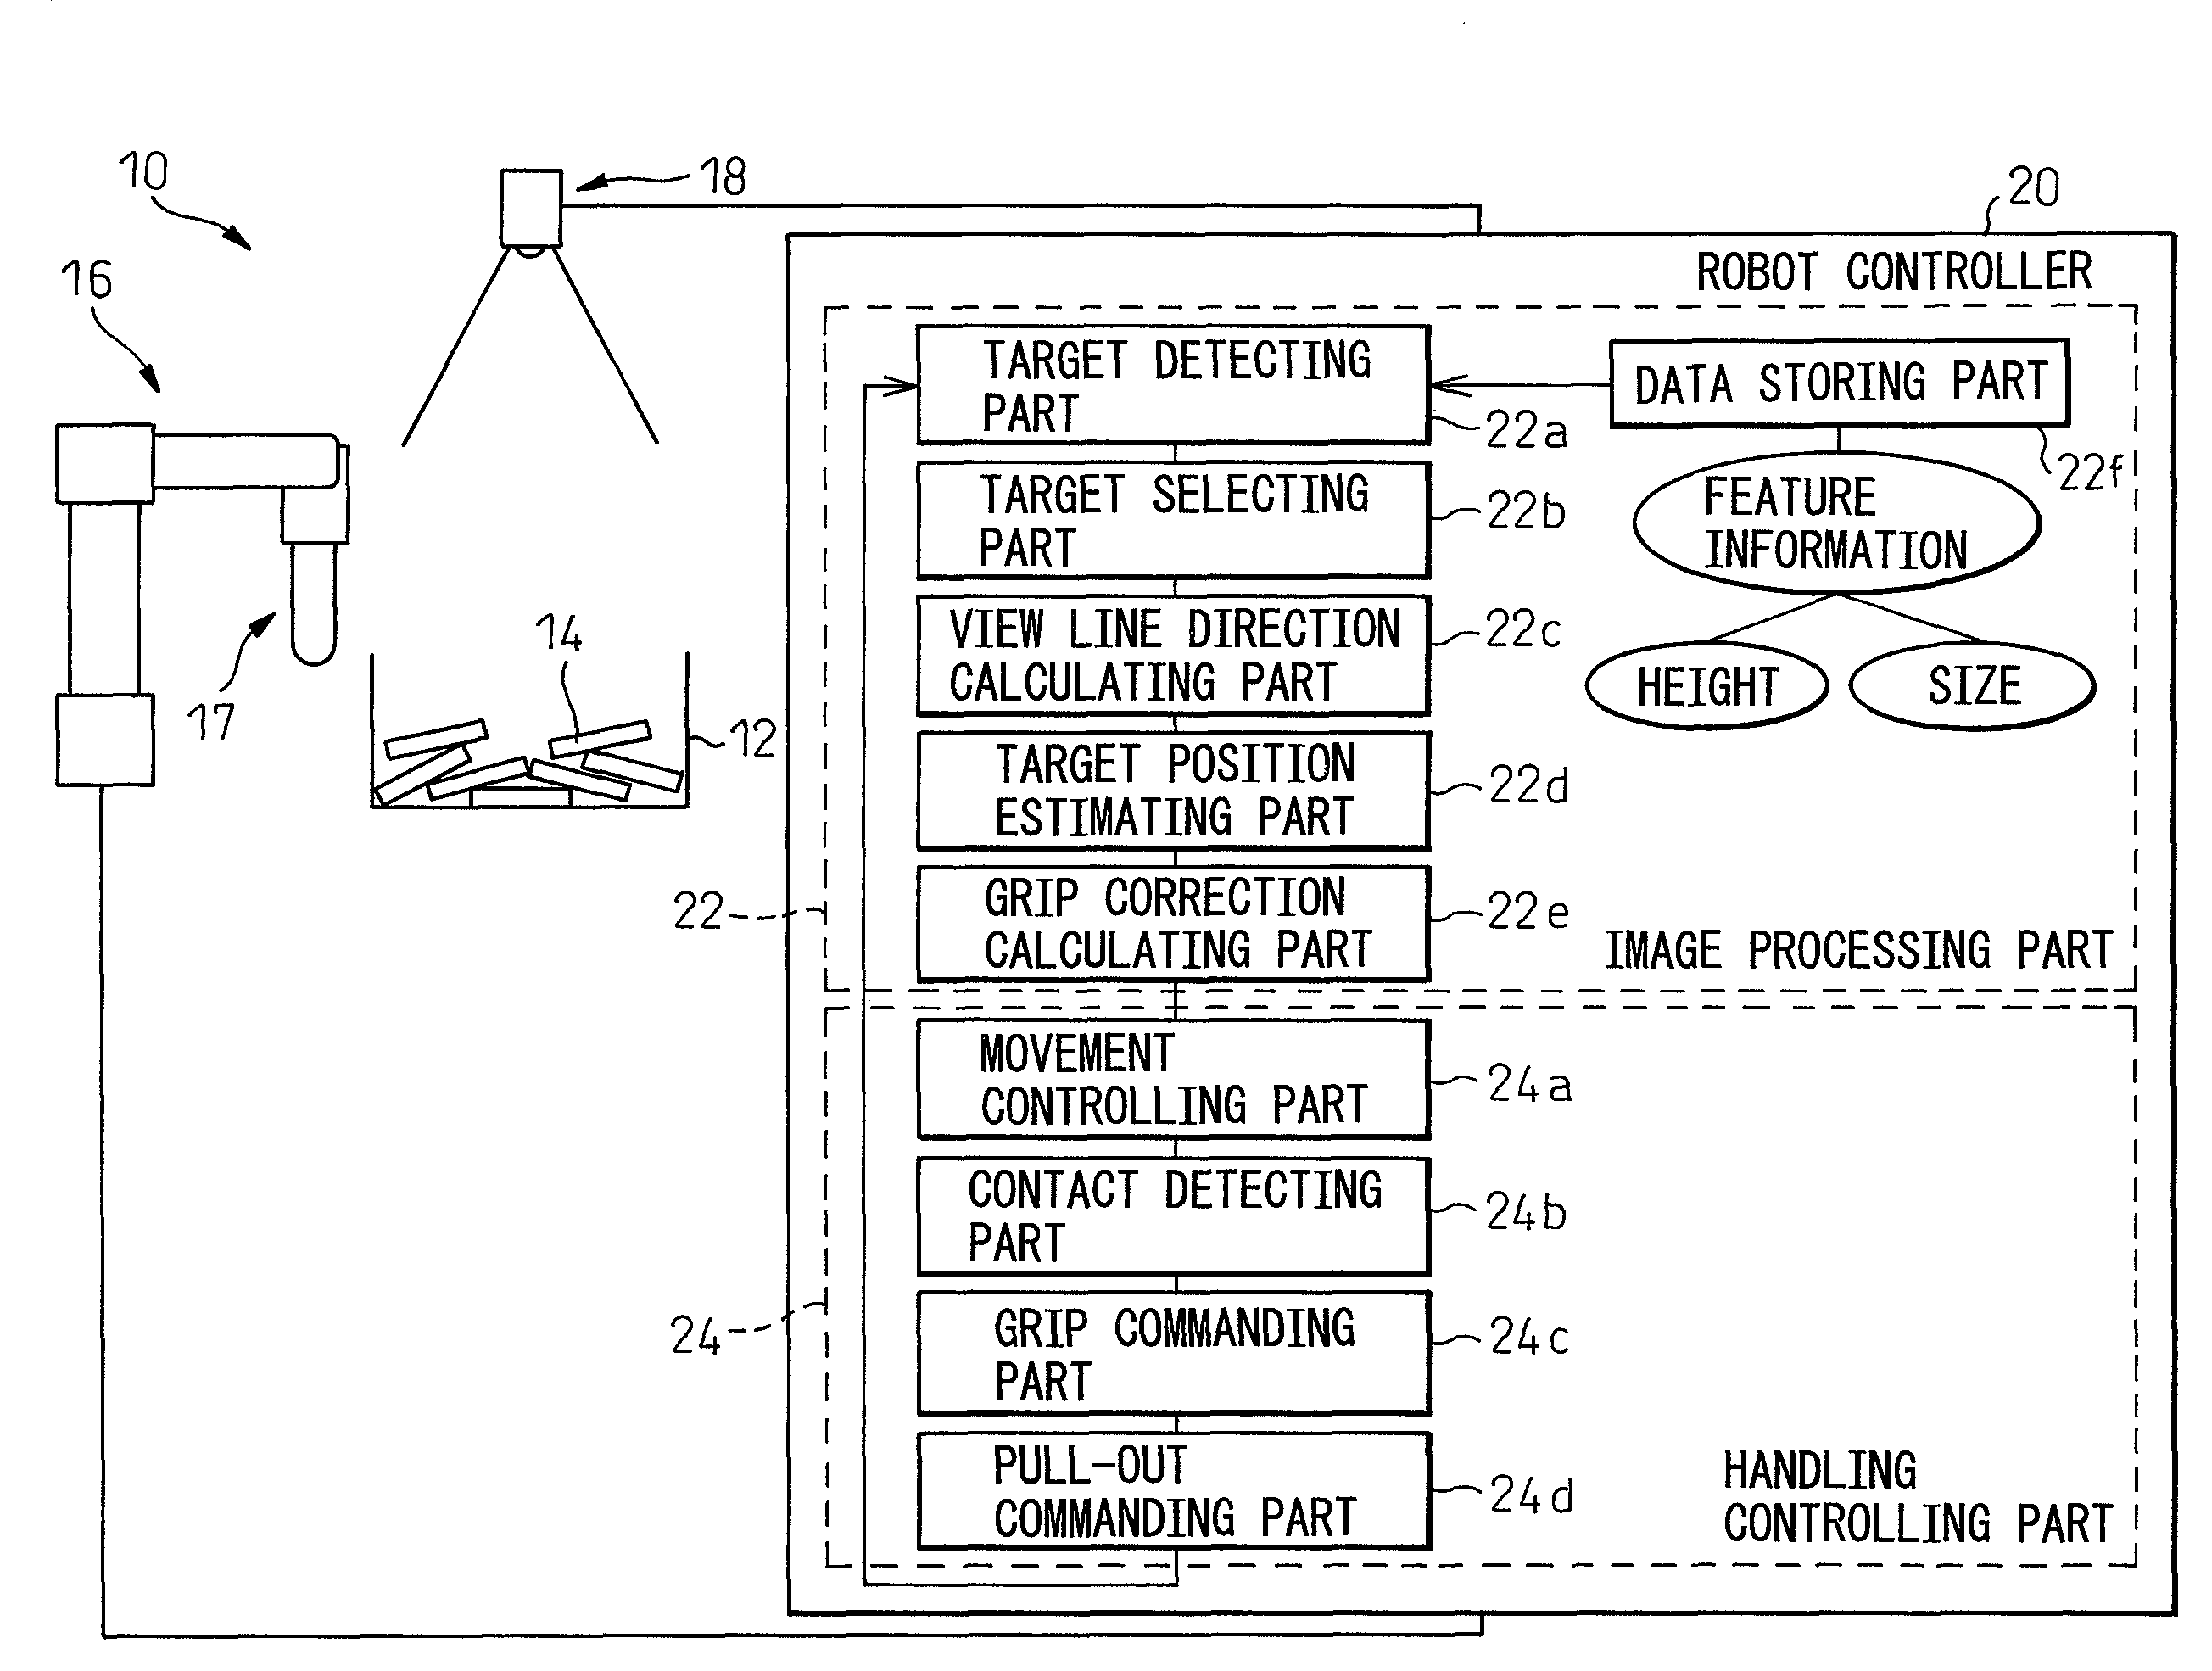 Object picking device